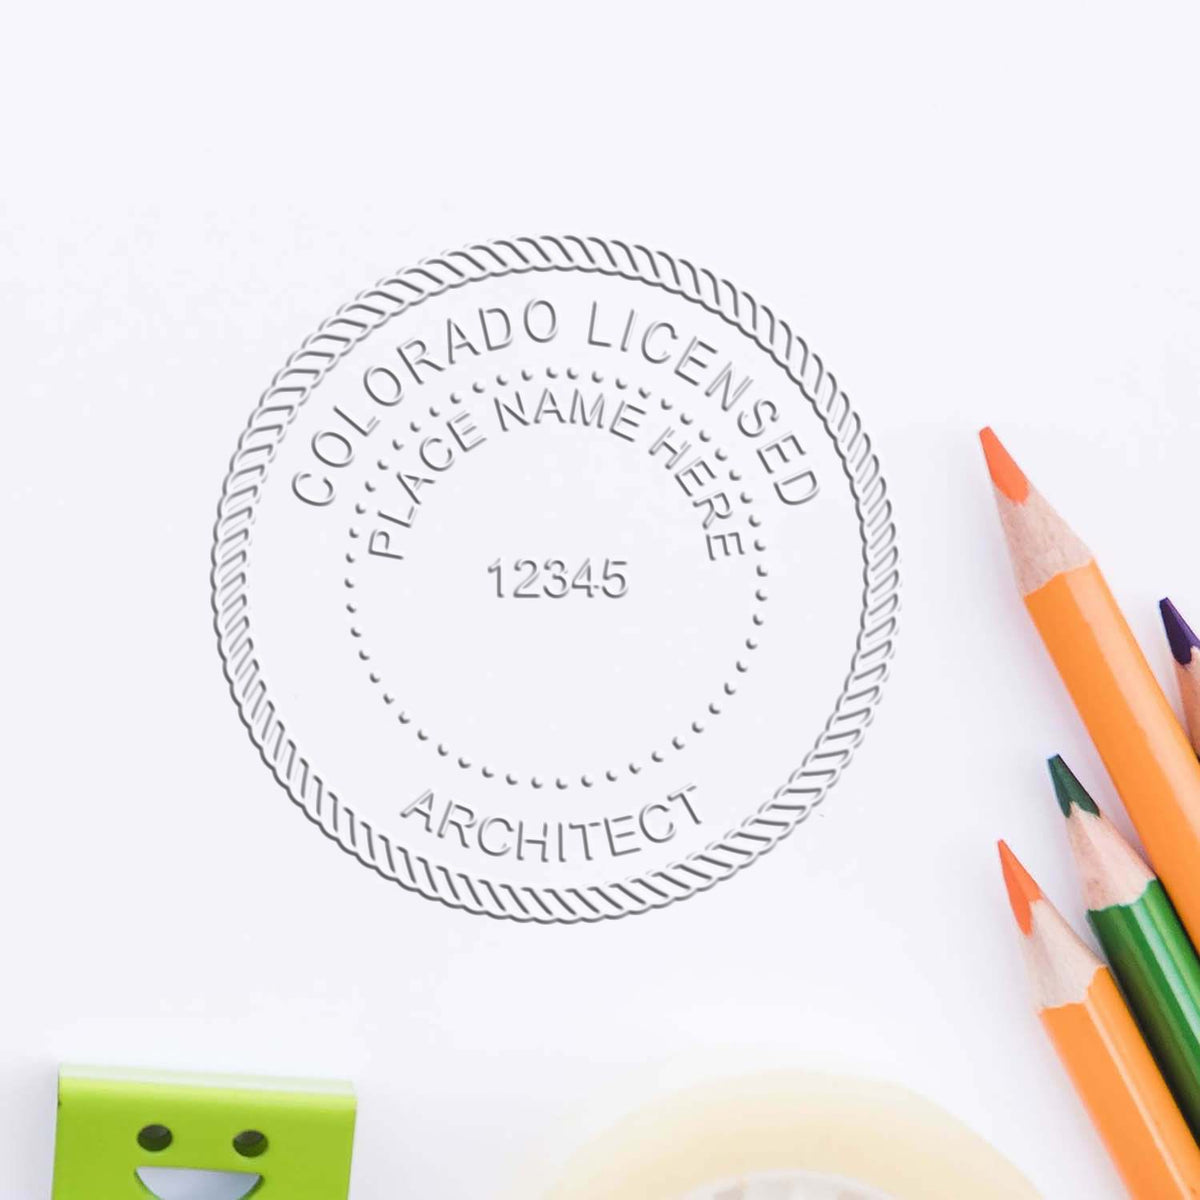 A stamped impression of the Colorado Desk Architect Embossing Seal in this stylish lifestyle photo, setting the tone for a unique and personalized product.